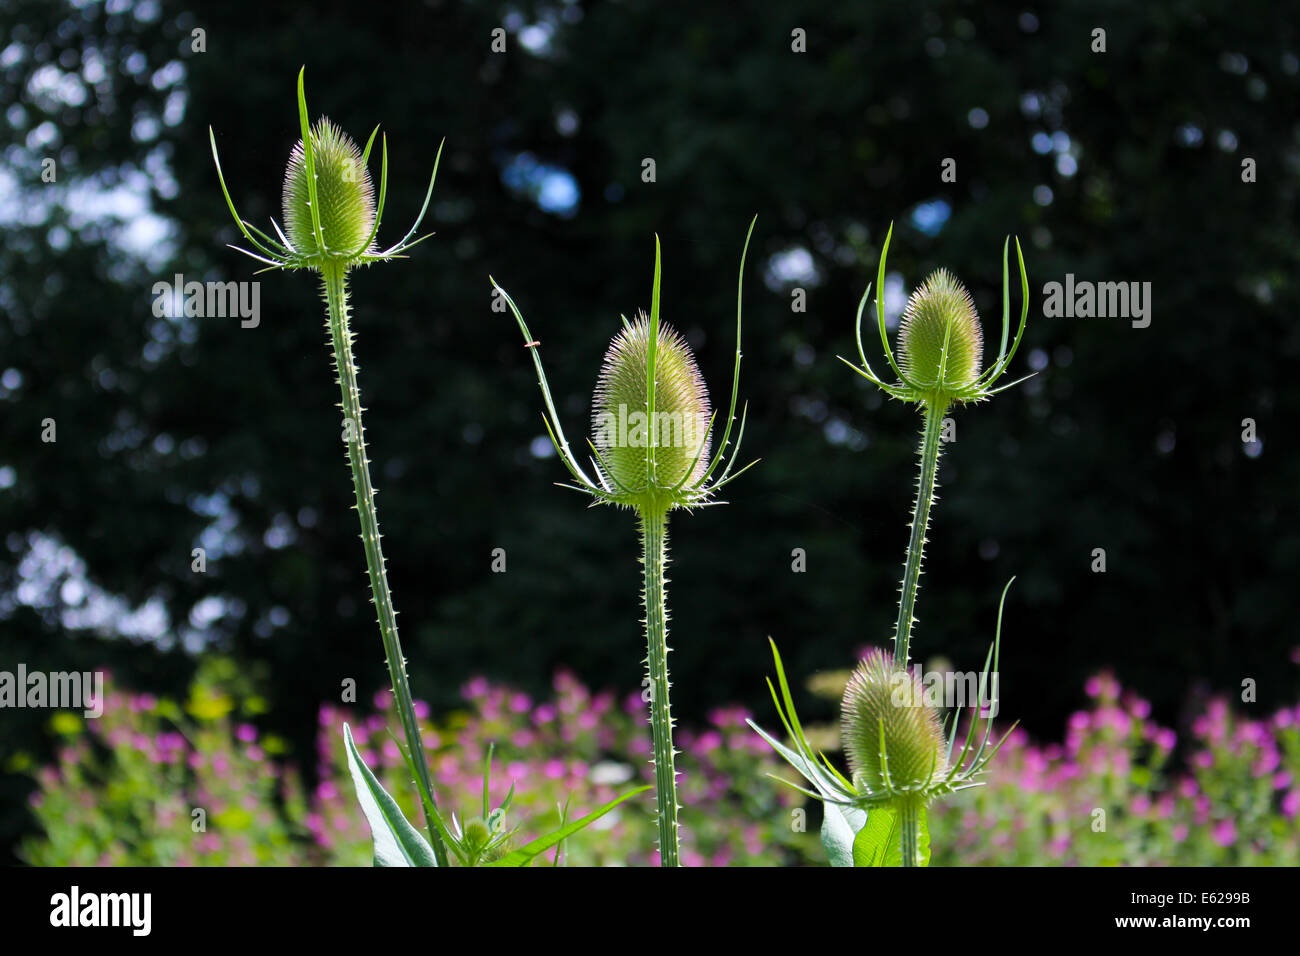 Stunning Wild Flowers, Common Teasels, prickly stems, conical heads and crown like edges Stock Photo